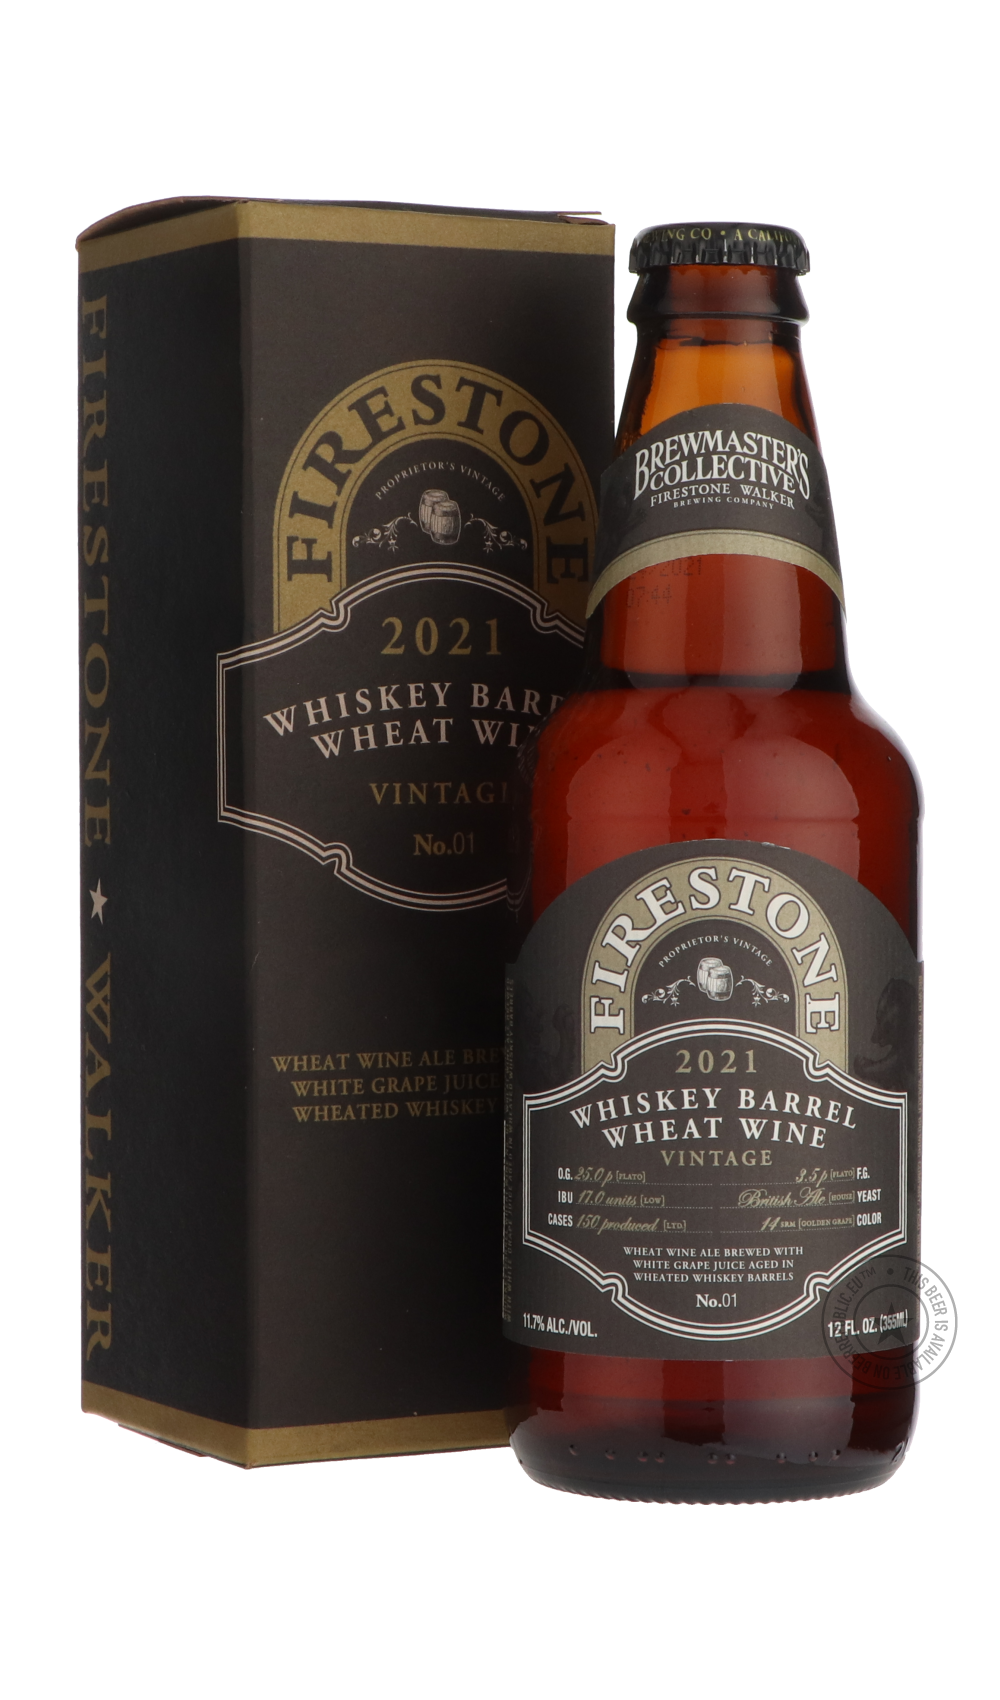 -Firestone Walker- Whiskey Barrel Wheat Wine-Brown & Dark- Only @ Beer Republic - The best online beer store for American & Canadian craft beer - Buy beer online from the USA and Canada - Bier online kopen - Amerikaans bier kopen - Craft beer store - Craft beer kopen - Amerikanisch bier kaufen - Bier online kaufen - Acheter biere online - IPA - Stout - Porter - New England IPA - Hazy IPA - Imperial Stout - Barrel Aged - Barrel Aged Imperial Stout - Brown - Dark beer - Blond - Blonde - Pilsner - Lager - Whea